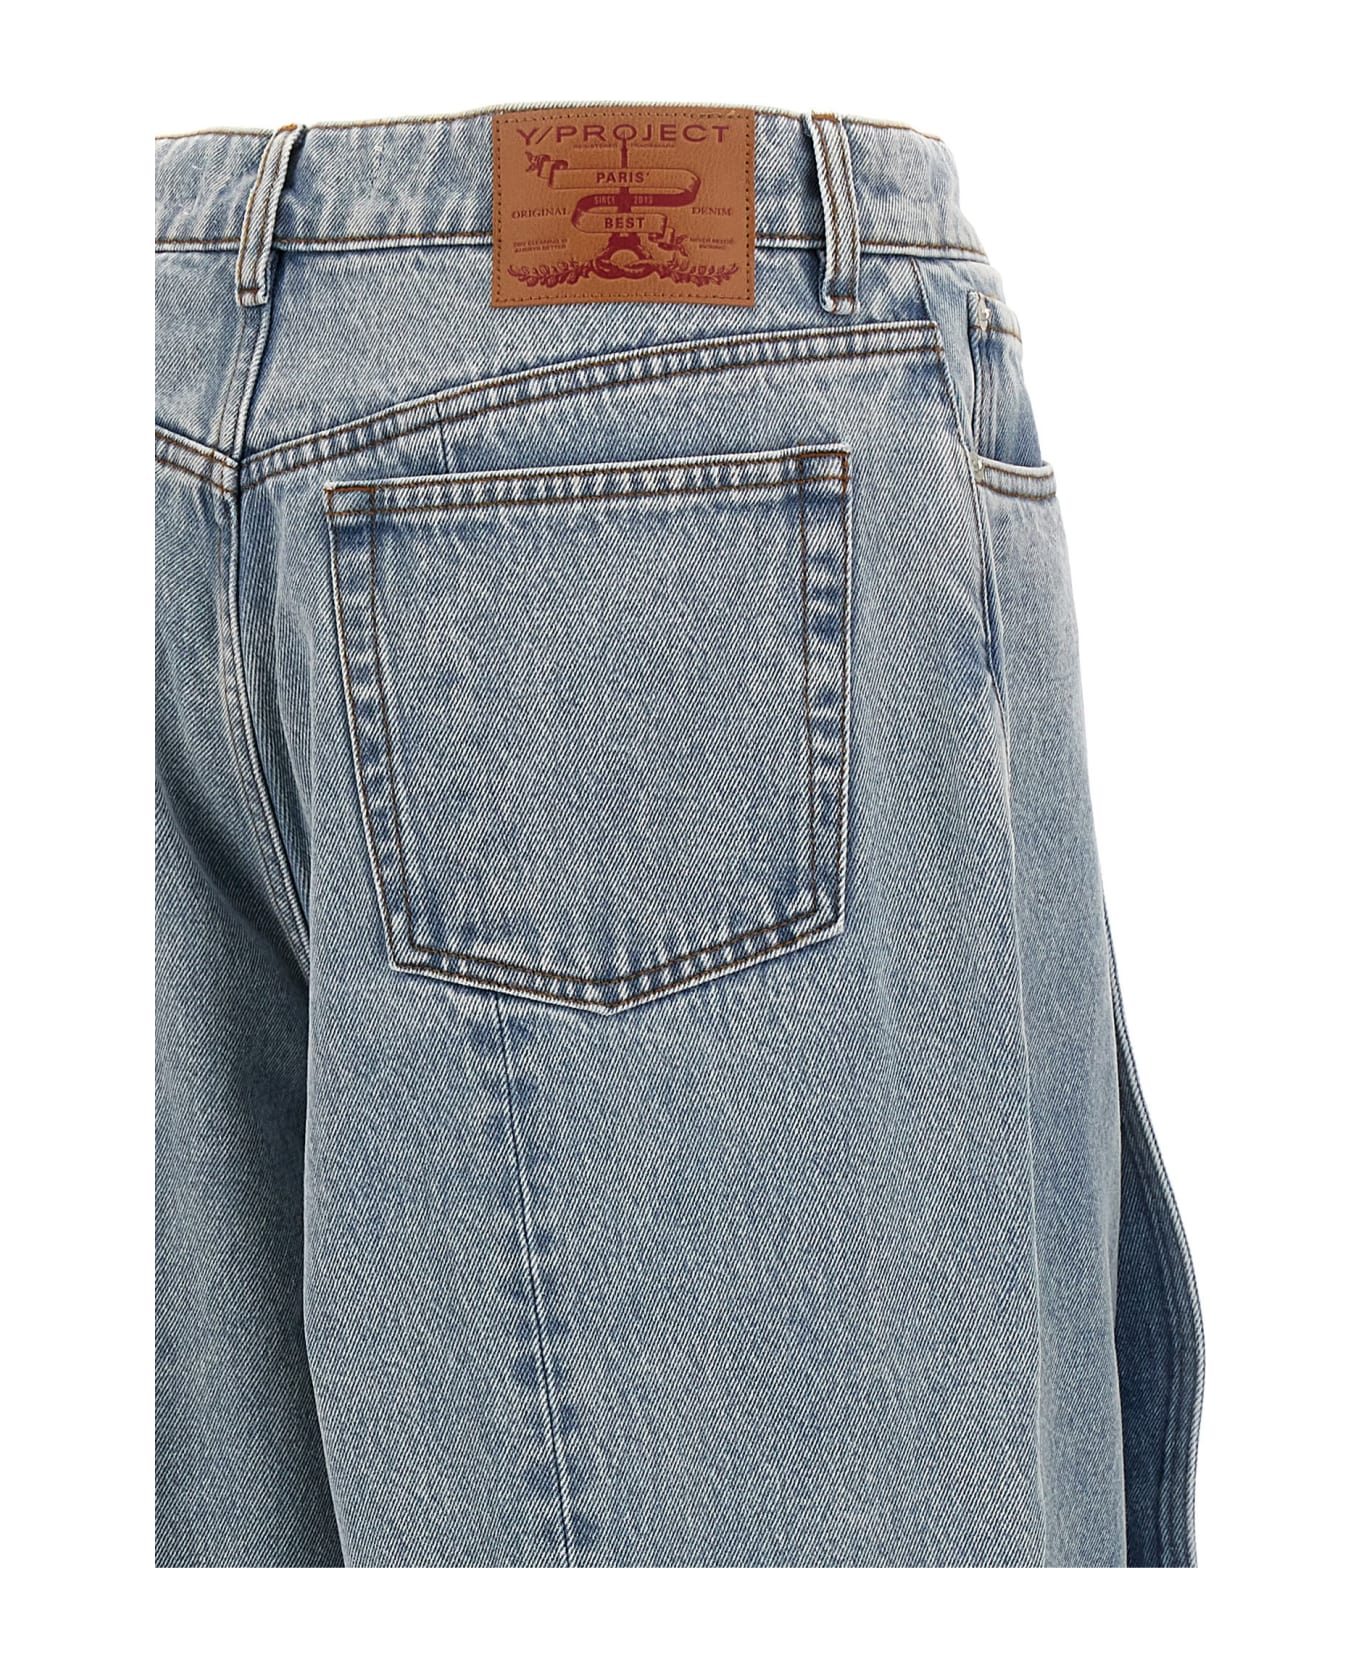 Y/Project 'evergreen Banana' Jeans - Light Blue name:463